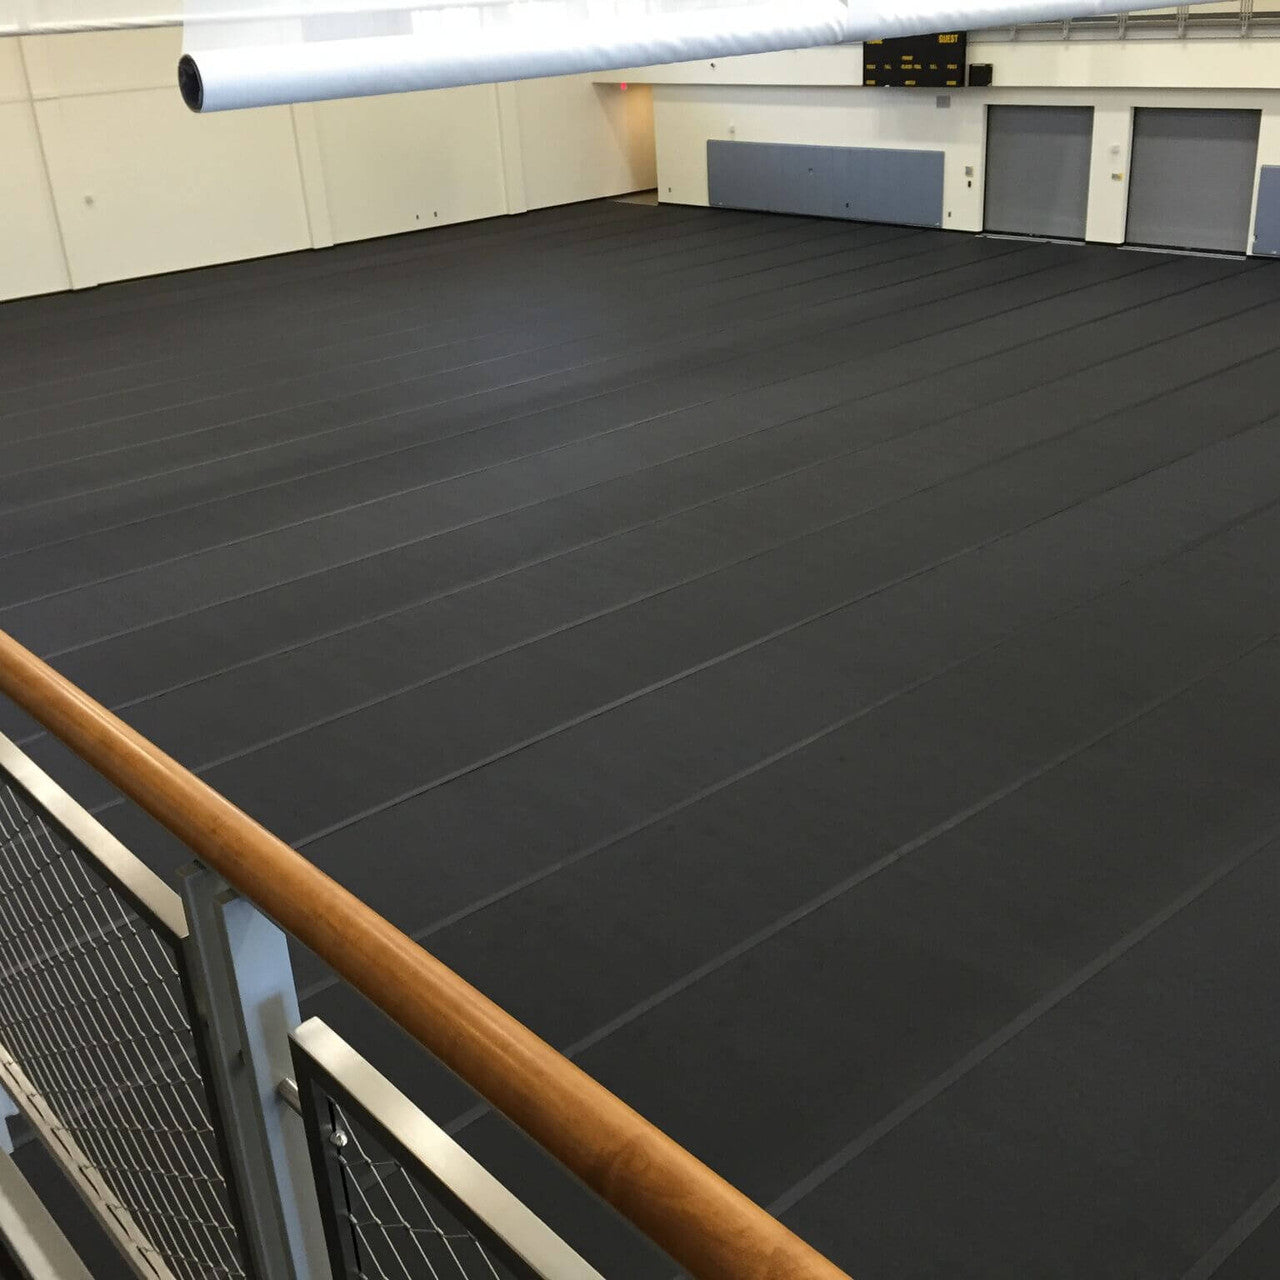 Anti-bacterial protective gym floor covering